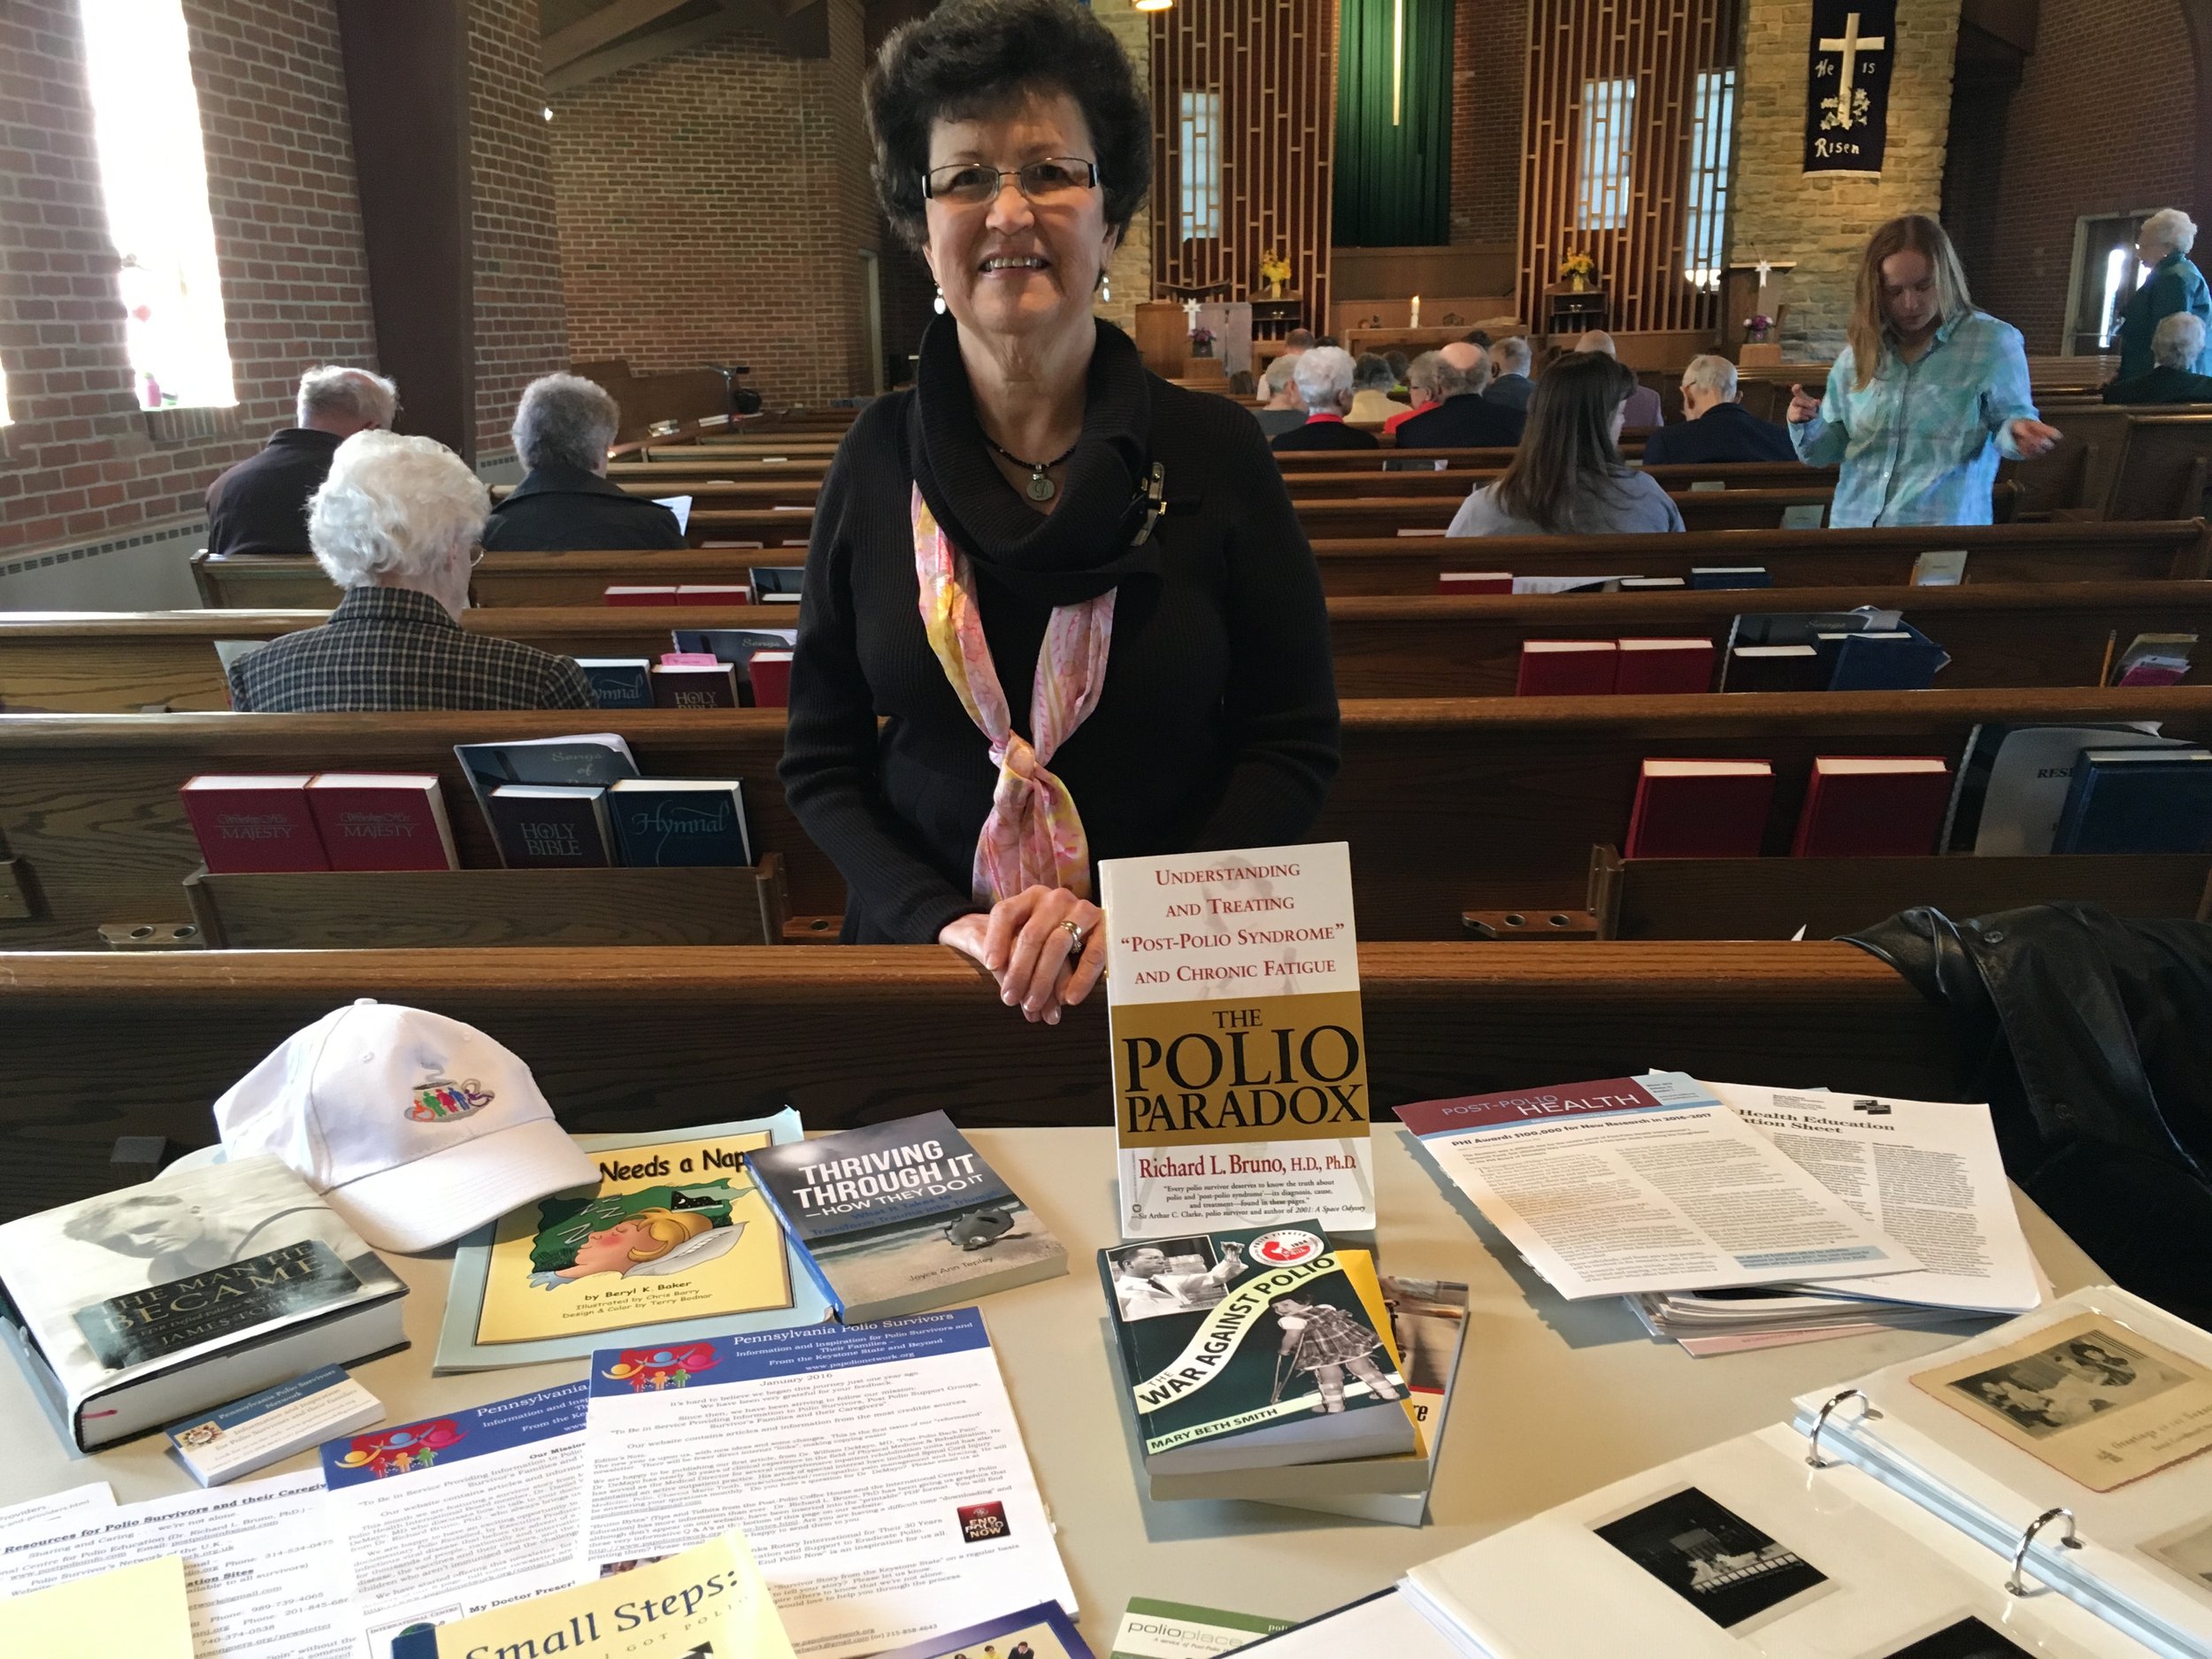  Survivor Deb Stamburgh – Speaking about the realities of the poliovirus at a local church, 2016 